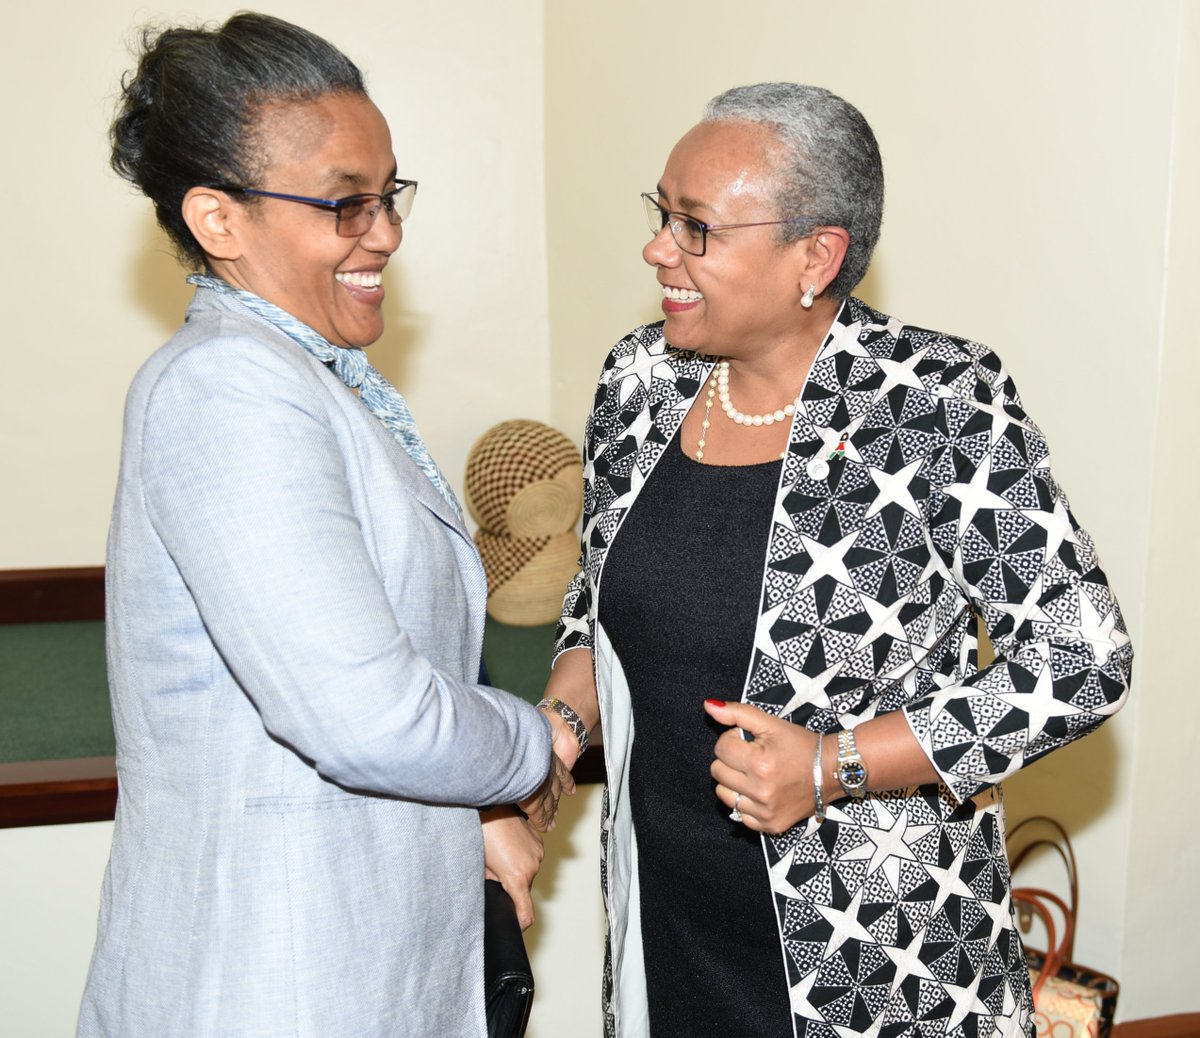 First Ladies Urged to Continue Advocacy in Addressing Root Causes of Problems